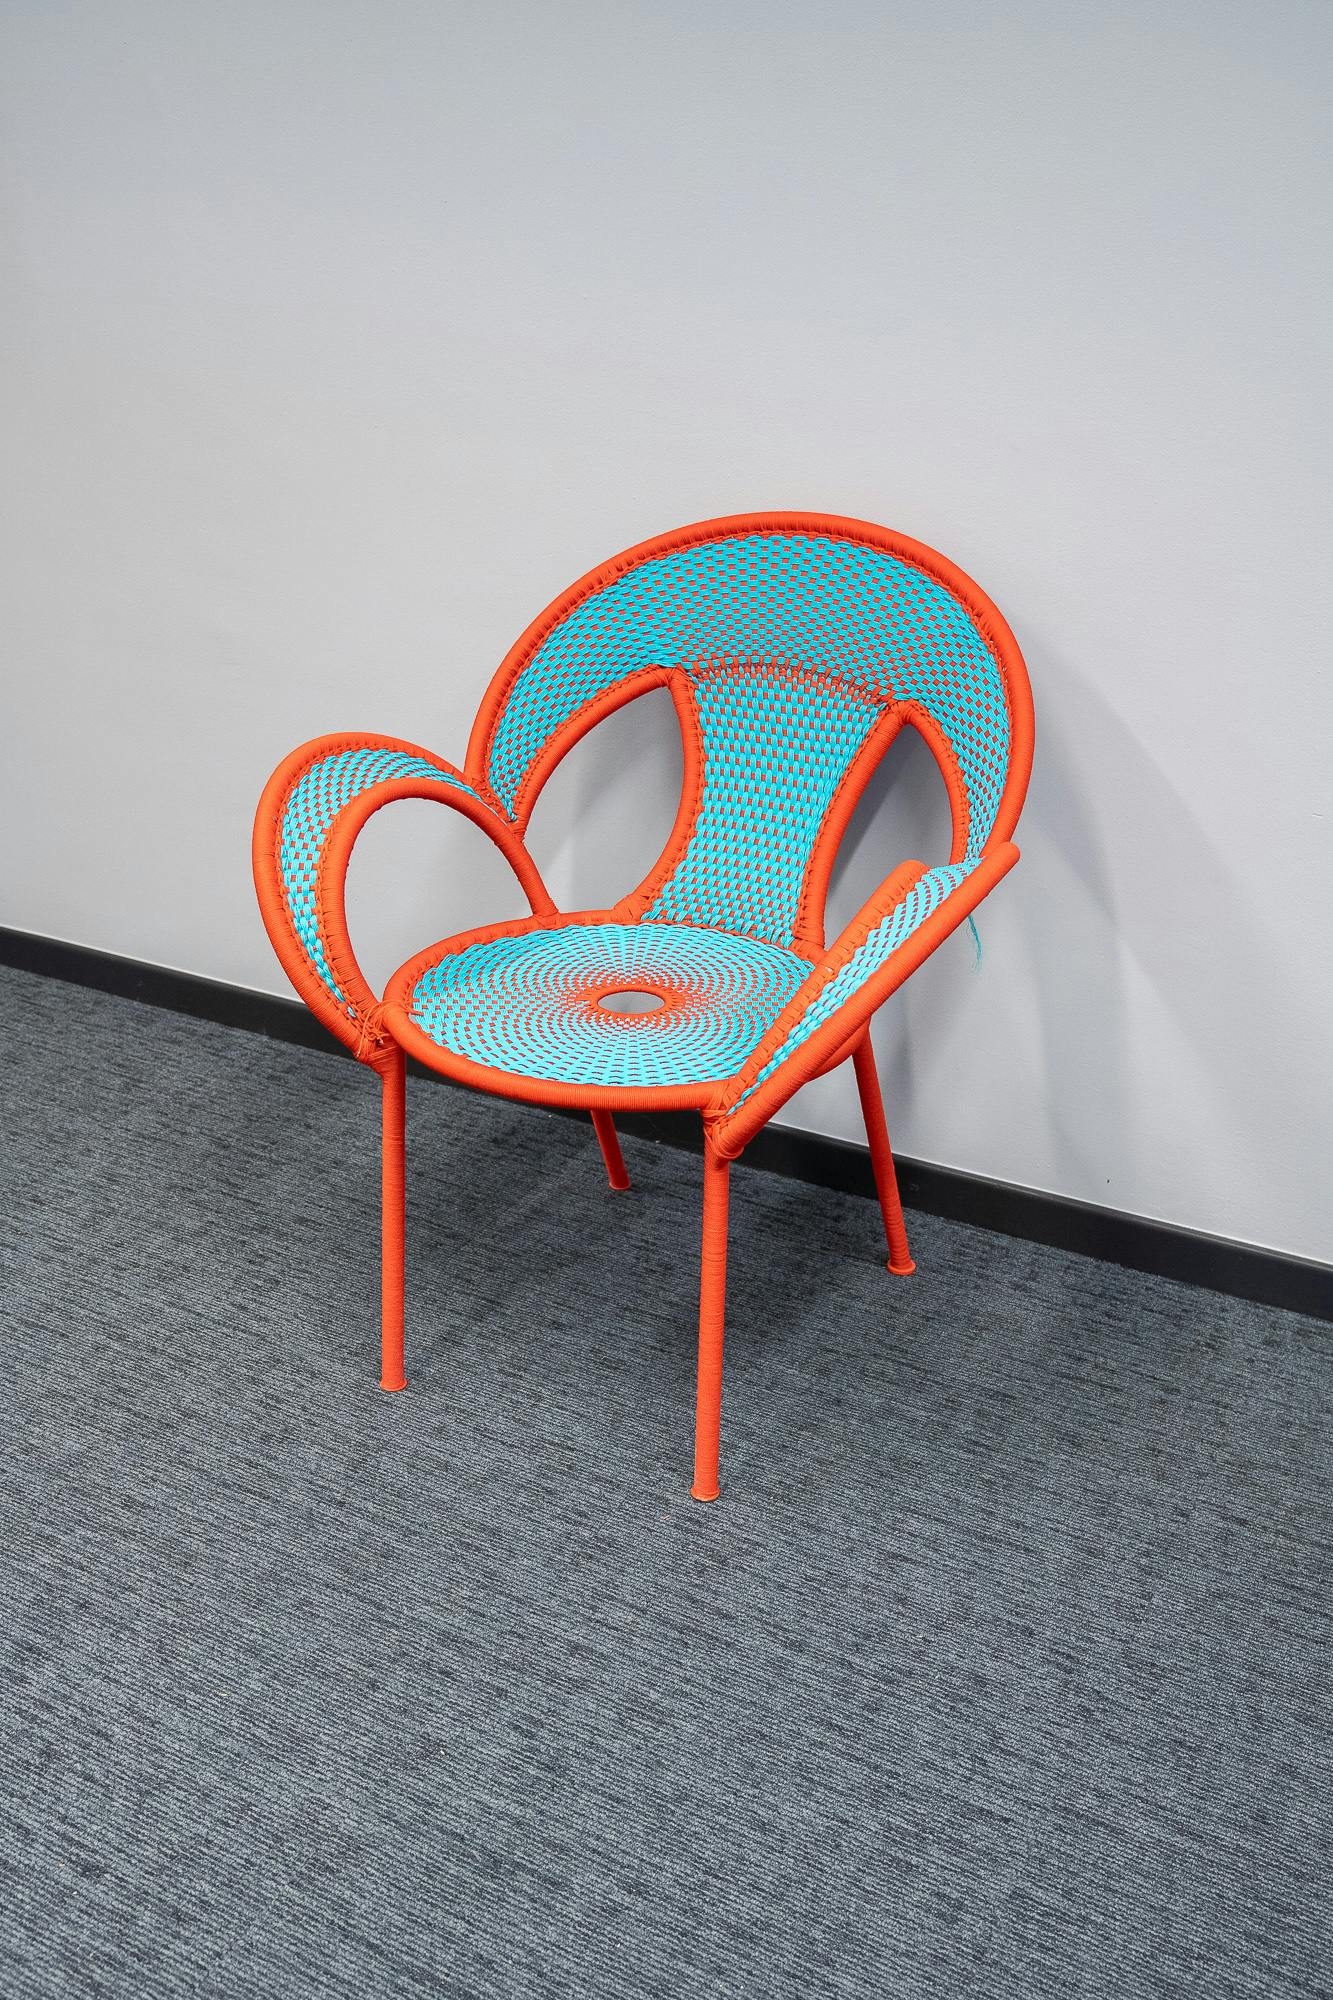 Turquoise and orange wicker chair Moroso - Second hand quality "Chairs" - Relieve Furniture